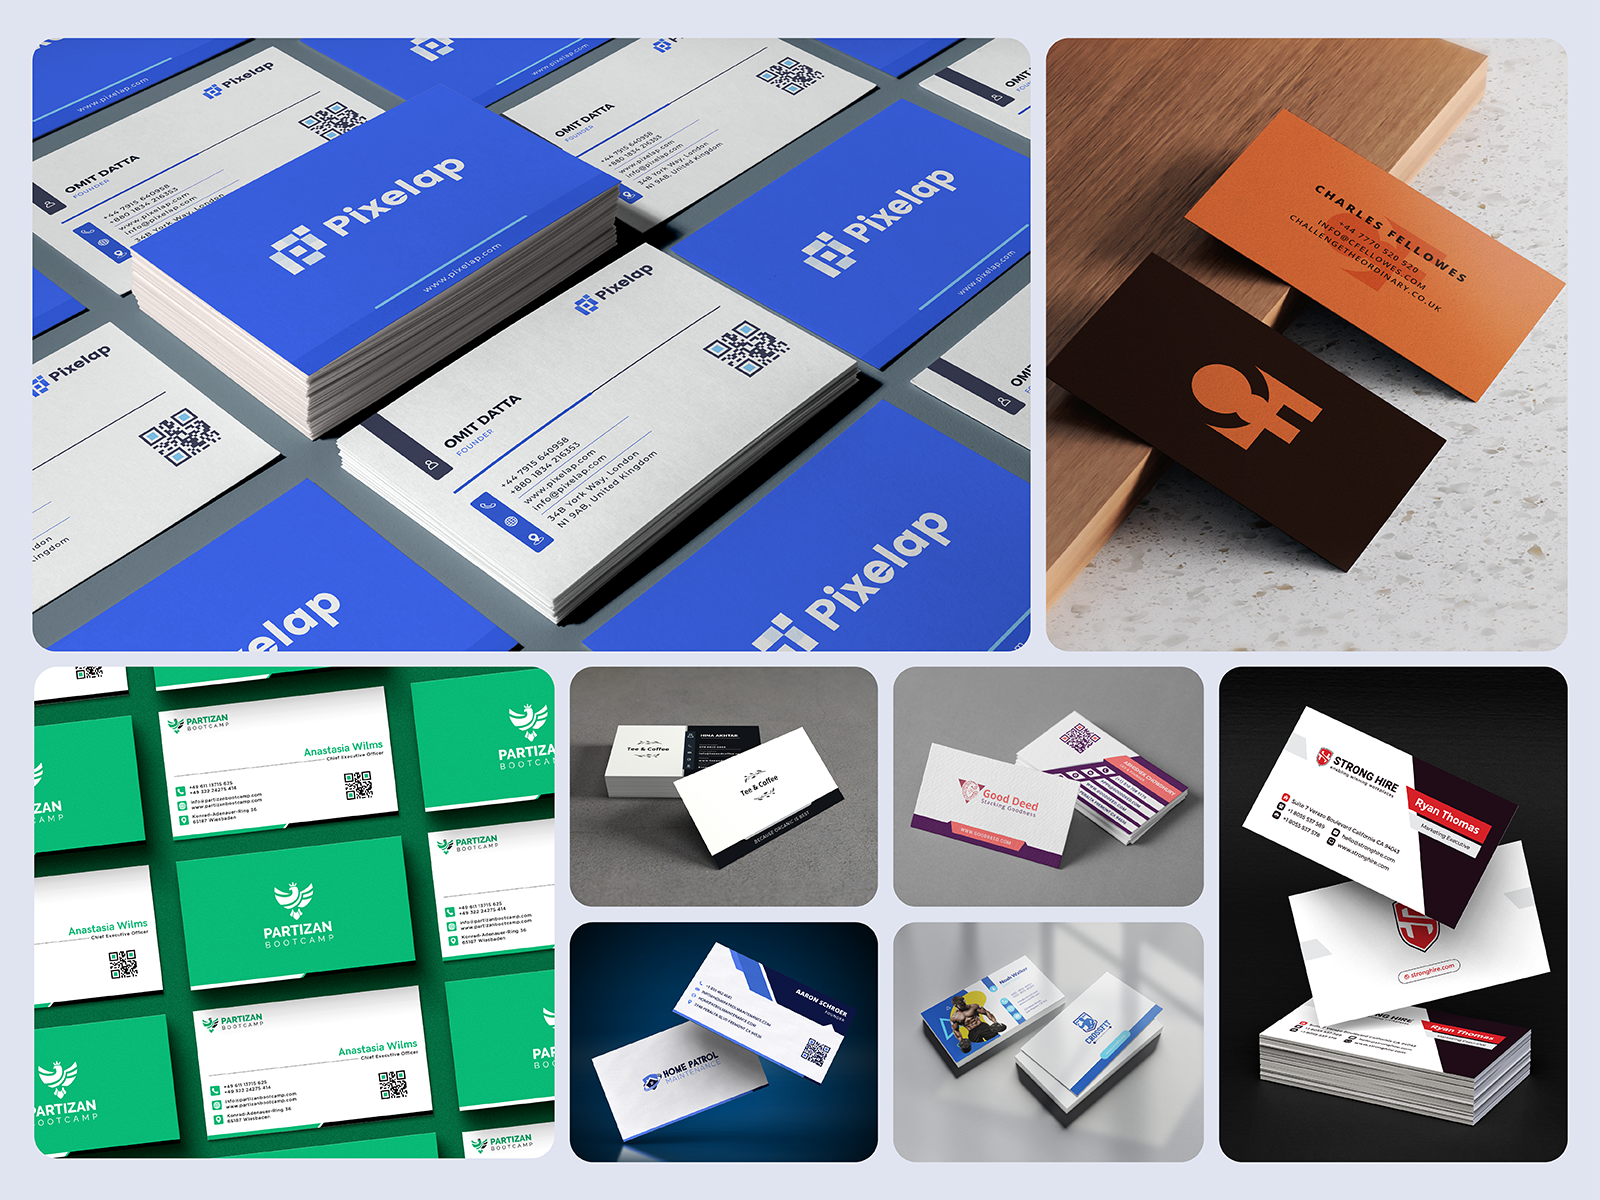 A collage of business cards